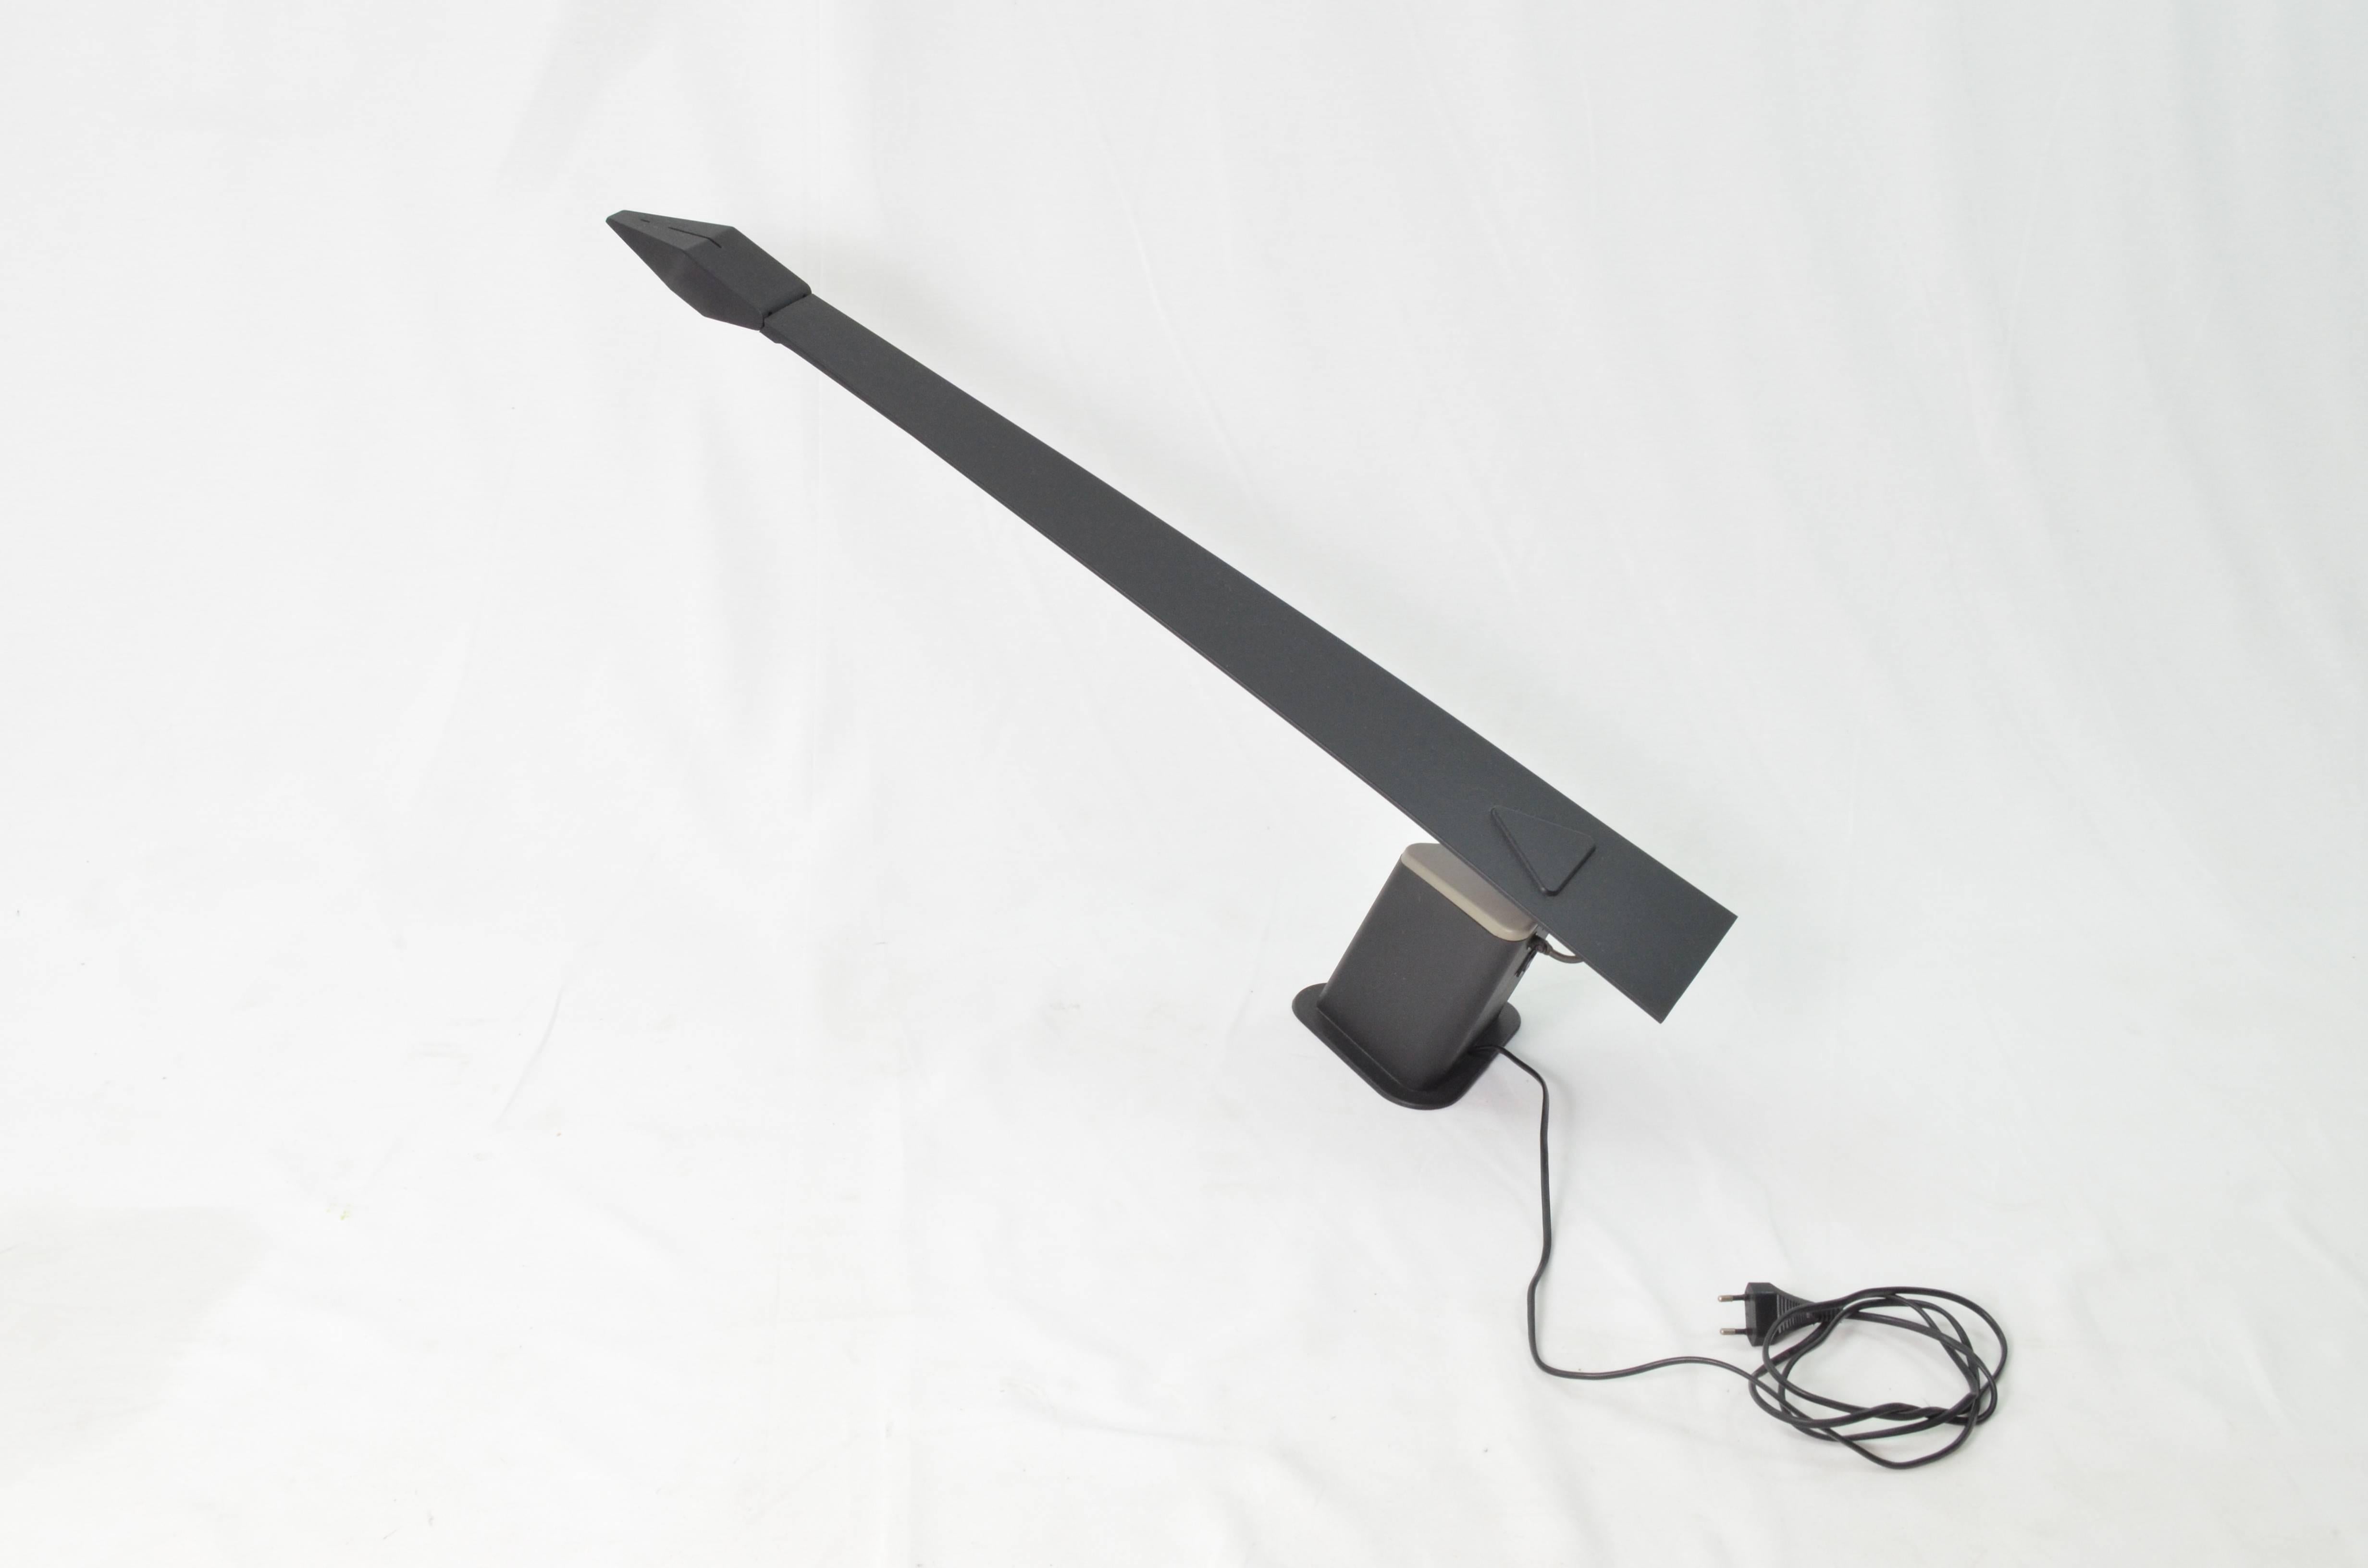 1980s Ilmo model table lamp, designed by Miriello Fogato. Inspired by Concorde aircraft. Black aluminum.
Design: Fogato Miriello in 1980s years, color black
Measures: Height 85 cm.
Length arm 87 cm.
Various positions adjustable.

Perfect as